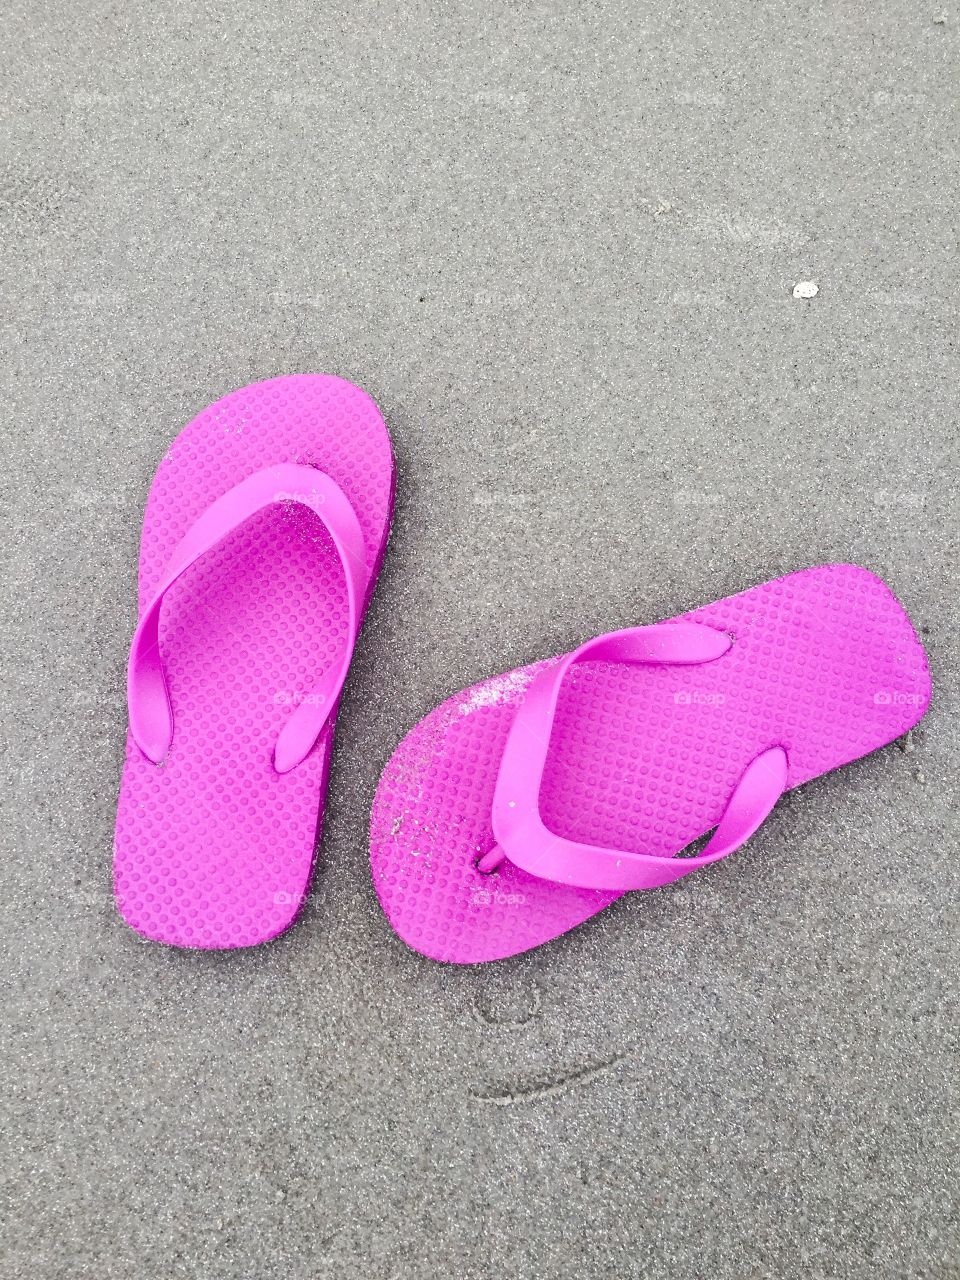 Ready for Summer? Pink flip flop sandals on the beach.